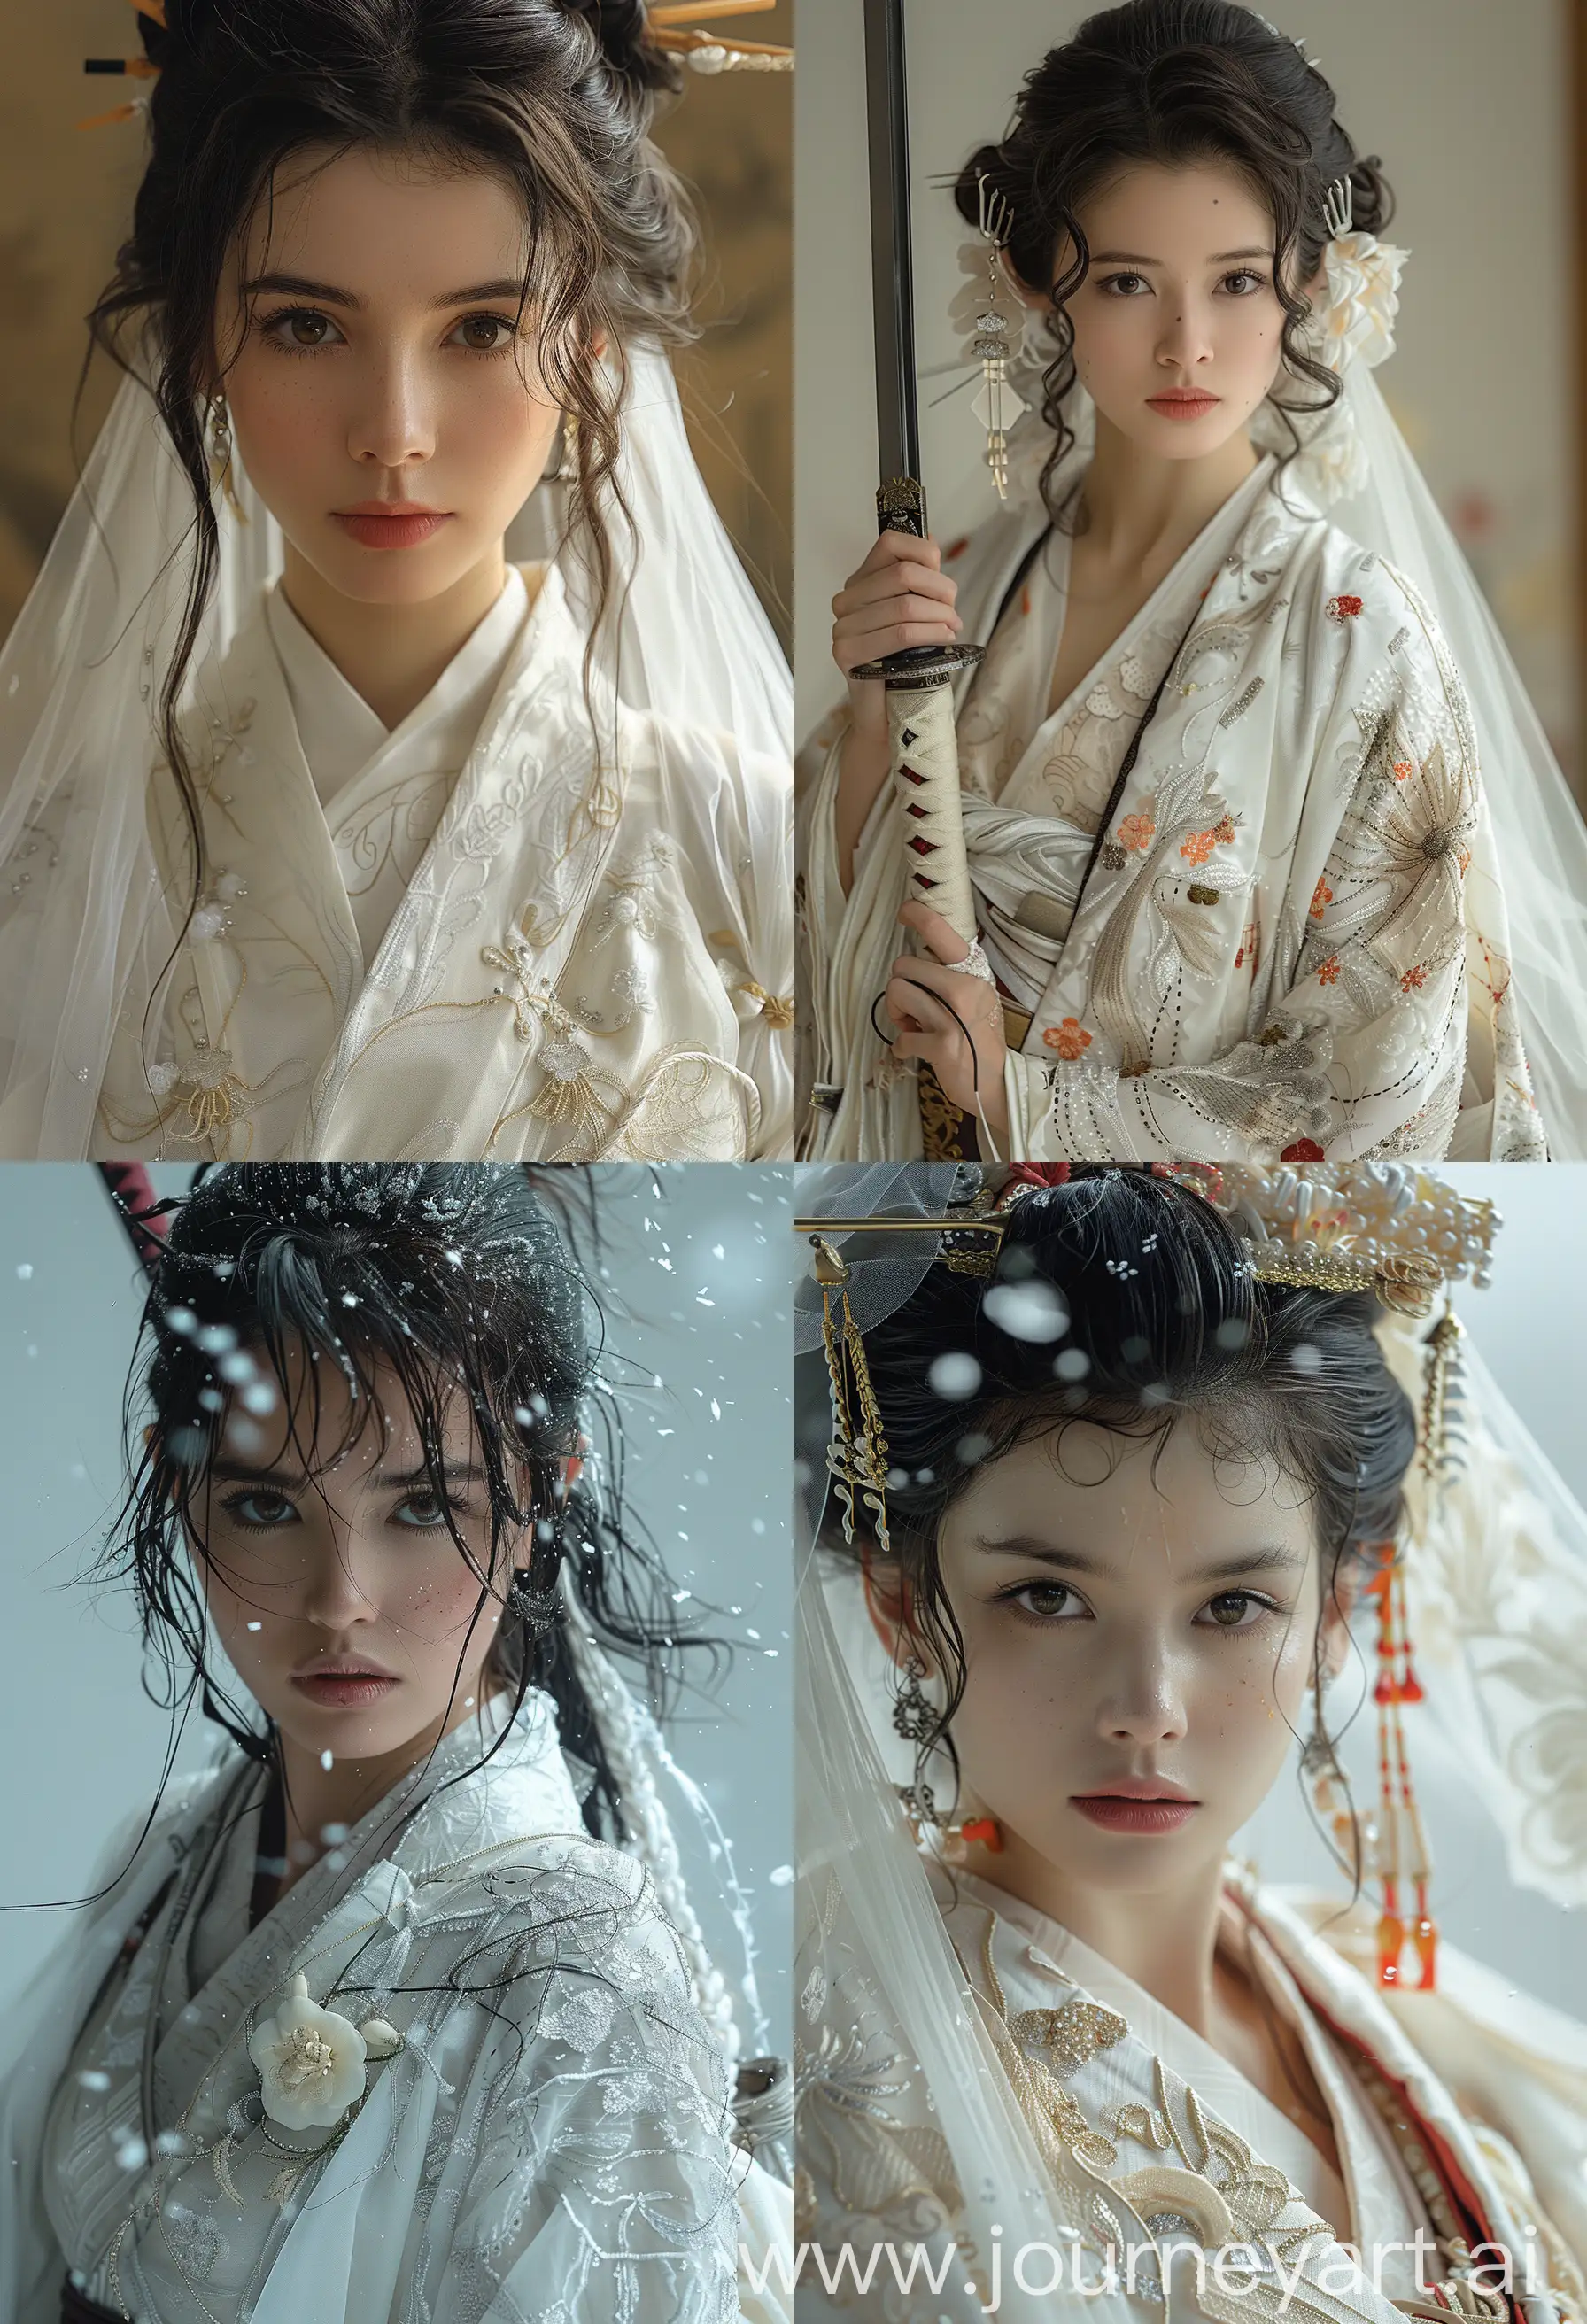 Ethereal-Bride-in-Pure-White-Wedding-Gown-with-Raiden-Shogun-Theme